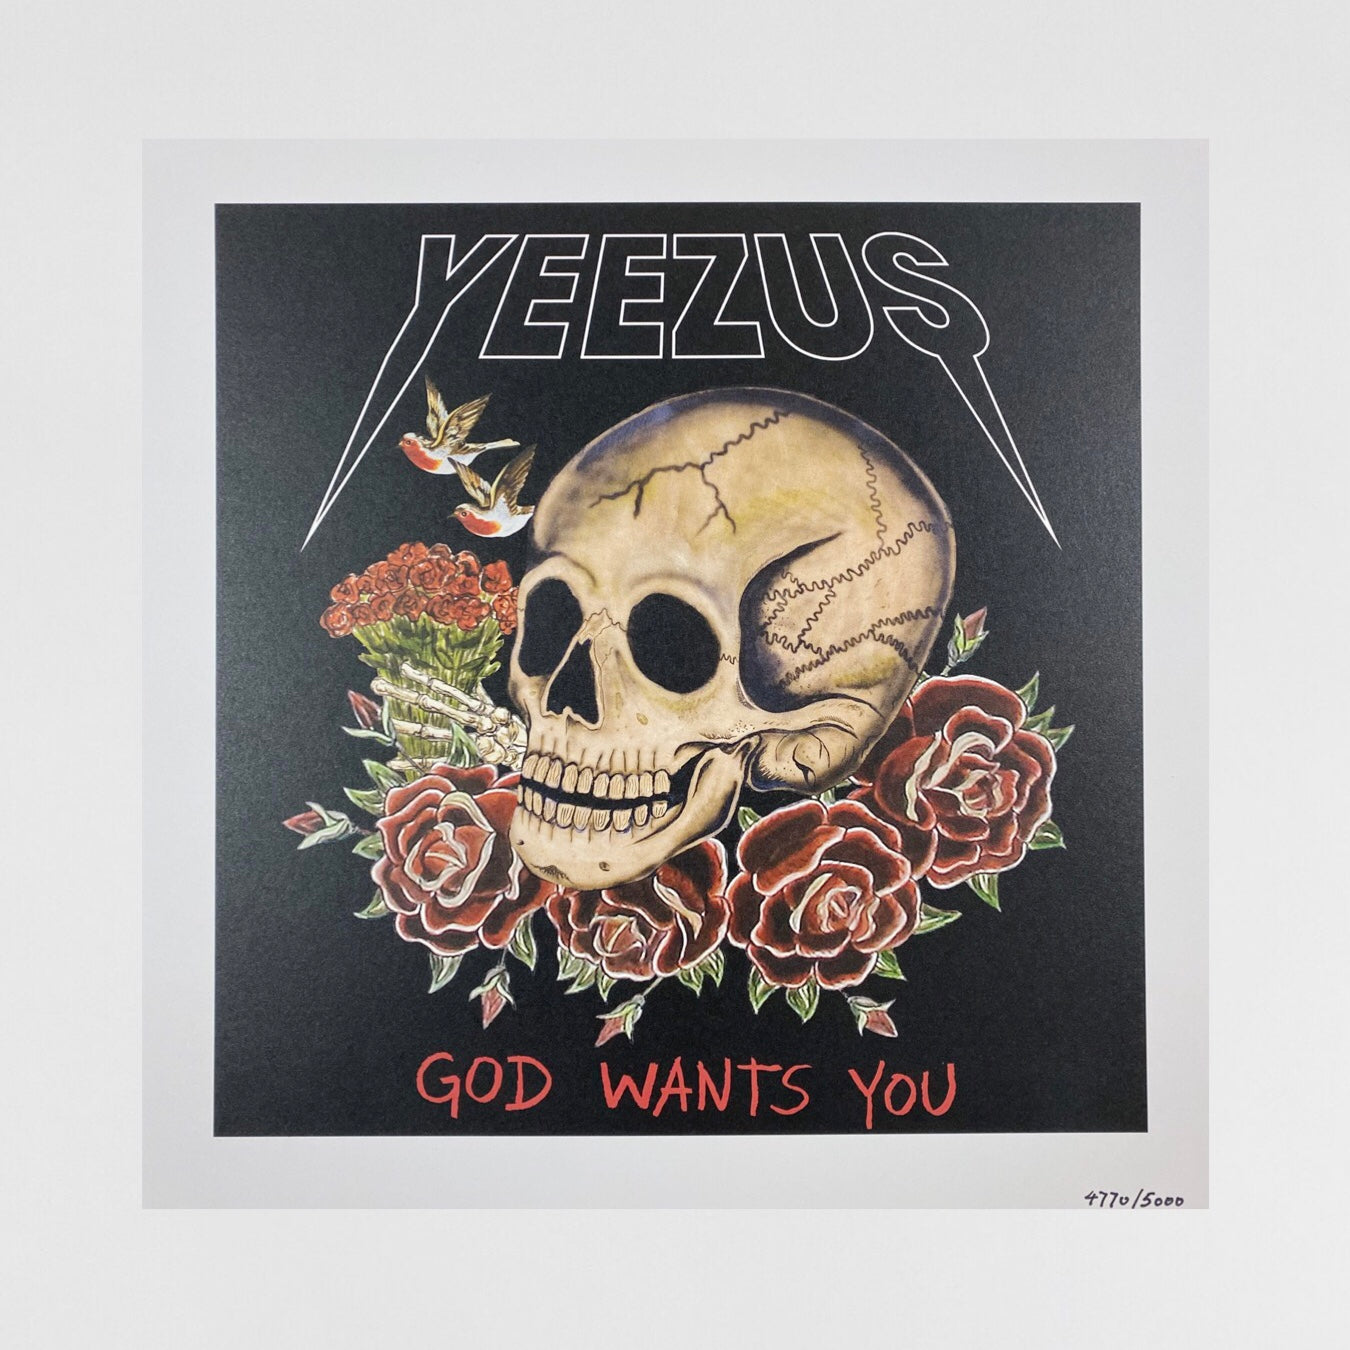 Yeezus Tour 2013 VIP Poster By Wes Lang